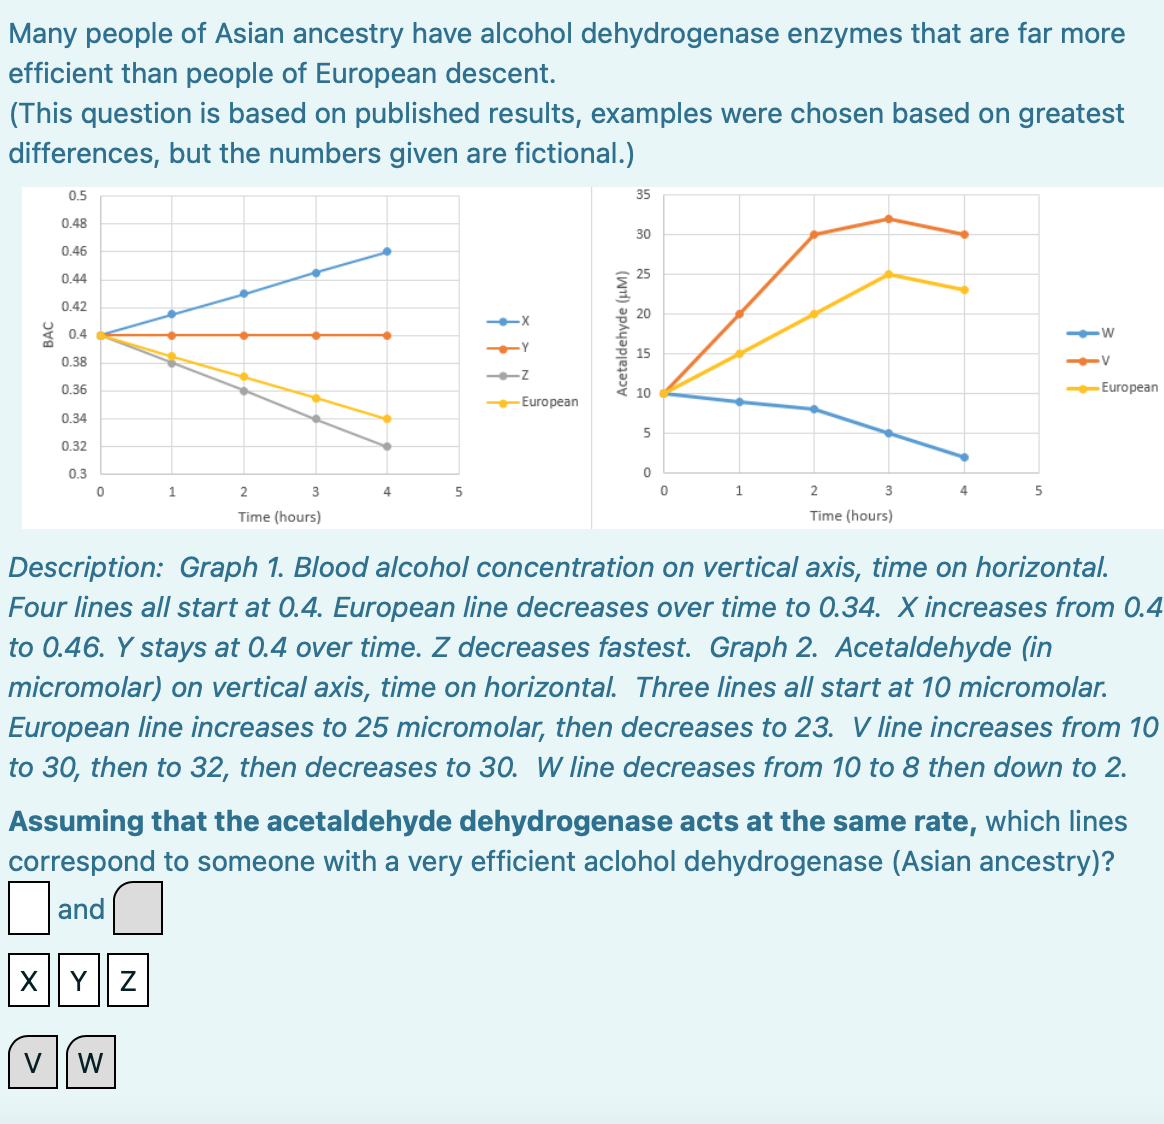 Many people of Asian ancestry have alcohol dehydrogenase enzymes that are far more
efficient than people of European descent.
(This question is based on published results, examples were chosen based on greatest
differences, but the numbers given are fictional.)
0.5
0.48
0.46
Kik
--European
0.44
0.42
0.4
0.38
0.36
0.34
0.32
0.3
0
1
X Y Z
2
3
Time (hours)
VW
4
35
5
30
10
5
0
0
1
2
Time (hours)
4
5
-W
-V
Description: Graph 1. Blood alcohol concentration on vertical axis, time on horizontal.
Four lines all start at 0.4. European line decreases over time to 0.34. X increases from 0.4
to 0.46. Y stays at 0.4 over time. Z decreases fastest. Graph 2. Acetaldehyde (in
micromolar) on vertical axis, time on horizontal. Three lines all start at 10 micromolar.
European line increases to 25 micromolar, then decreases to 23. V line increases from 10
to 30, then to 32, then decreases to 30. W line decreases from 10 to 8 then down to 2.
--European
Assuming that the acetaldehyde dehydrogenase acts at the same rate, which lines
correspond to someone with a very efficient aclohol dehydrogenase (Asian ancestry)?
and